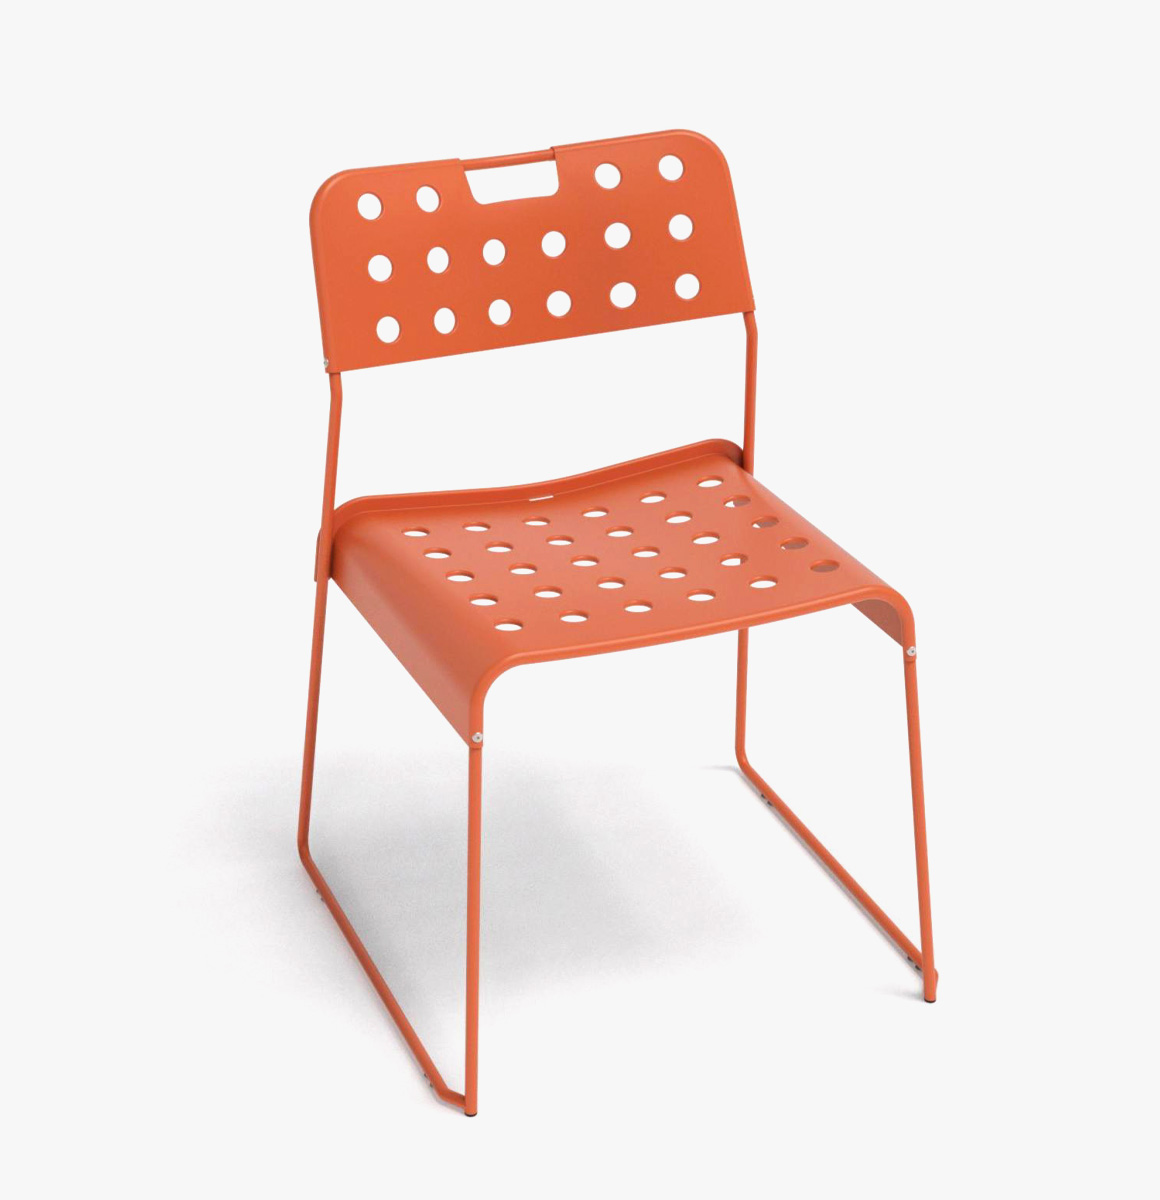 omk stak chair